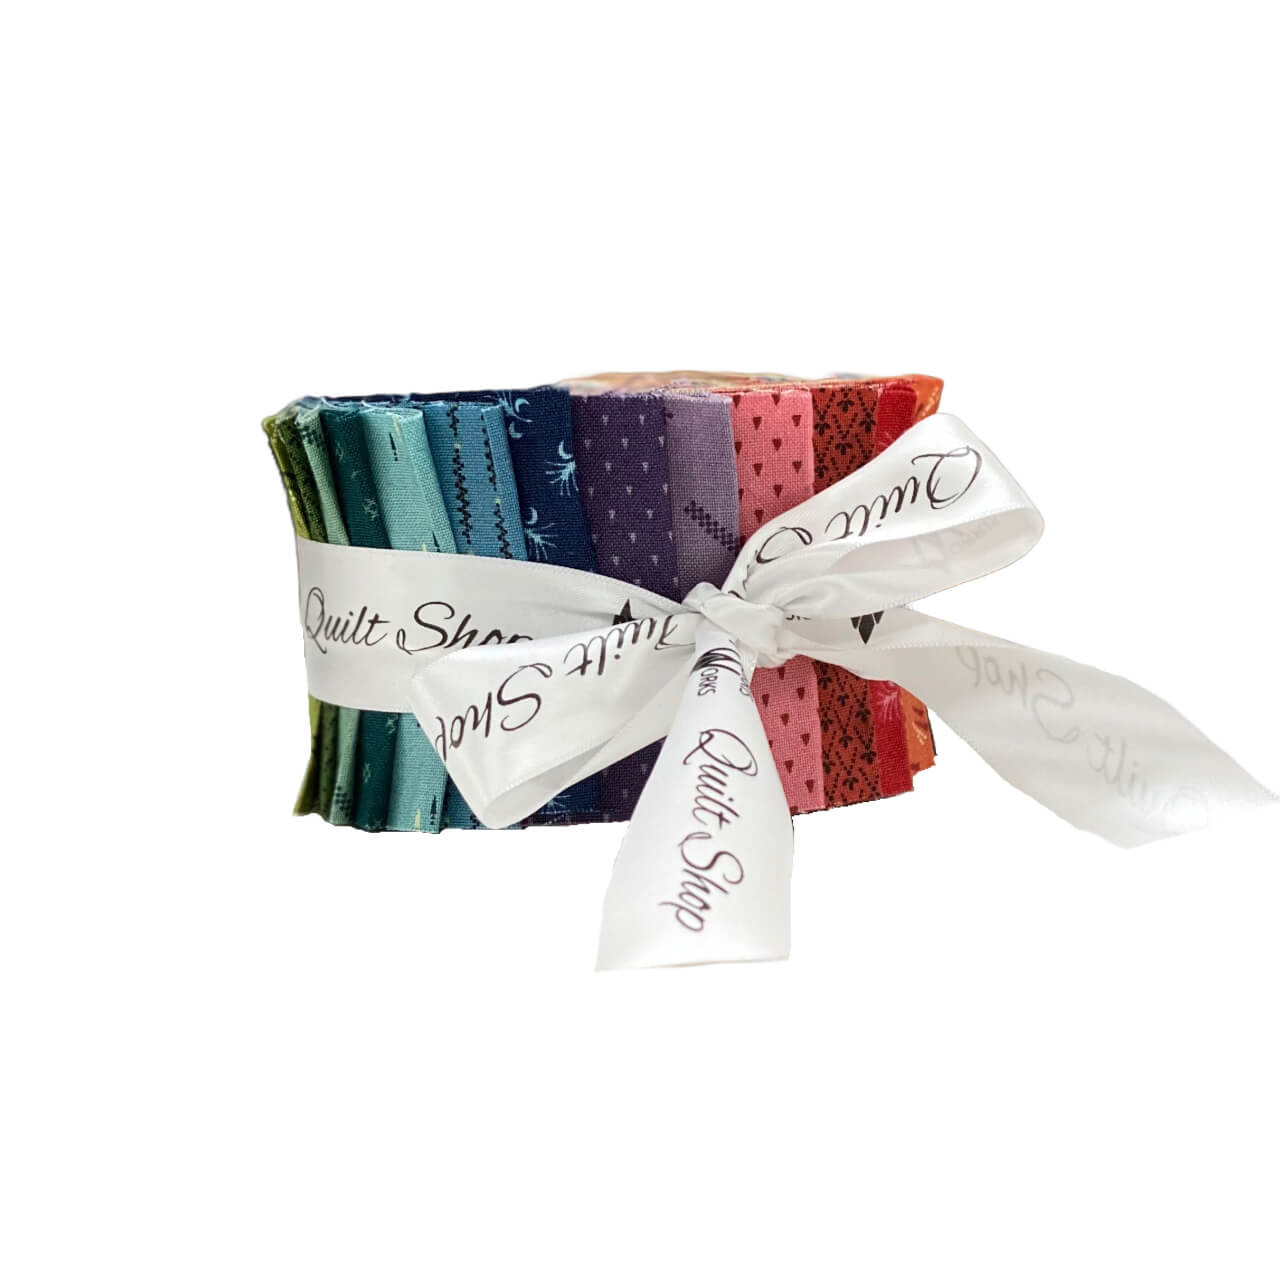 A Jelly Roll of Jewelbox 2½ inch fabric strips rolled against a white background